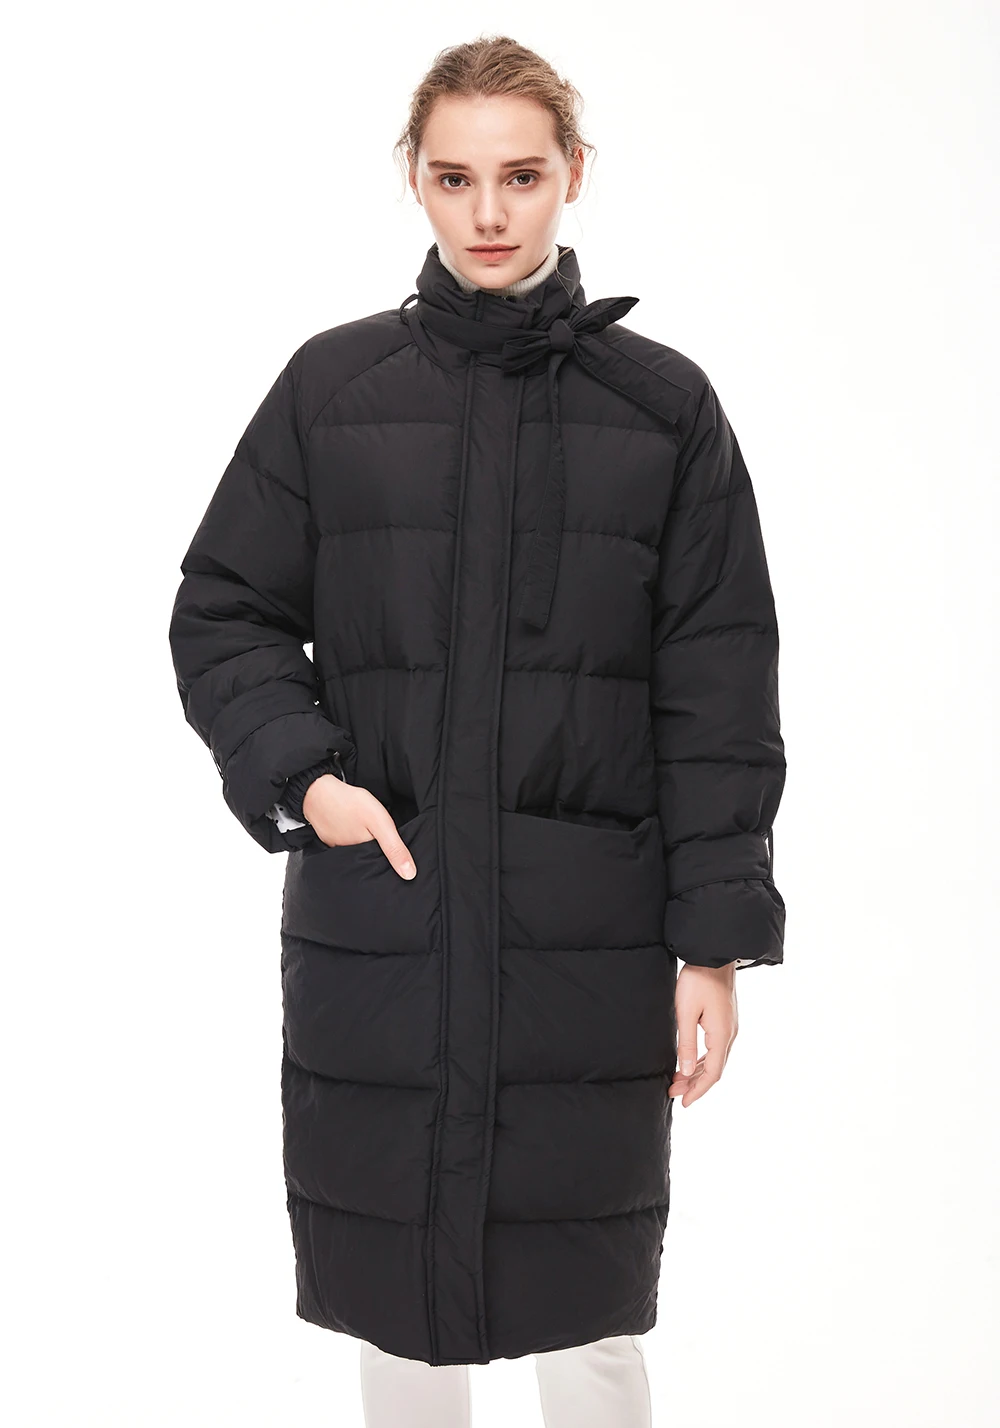 

Womens Down Jacket Quilted Packable Puffer Coat Thicken Zip Up Winter Warm Long Overcoat Outerwear with Pockets